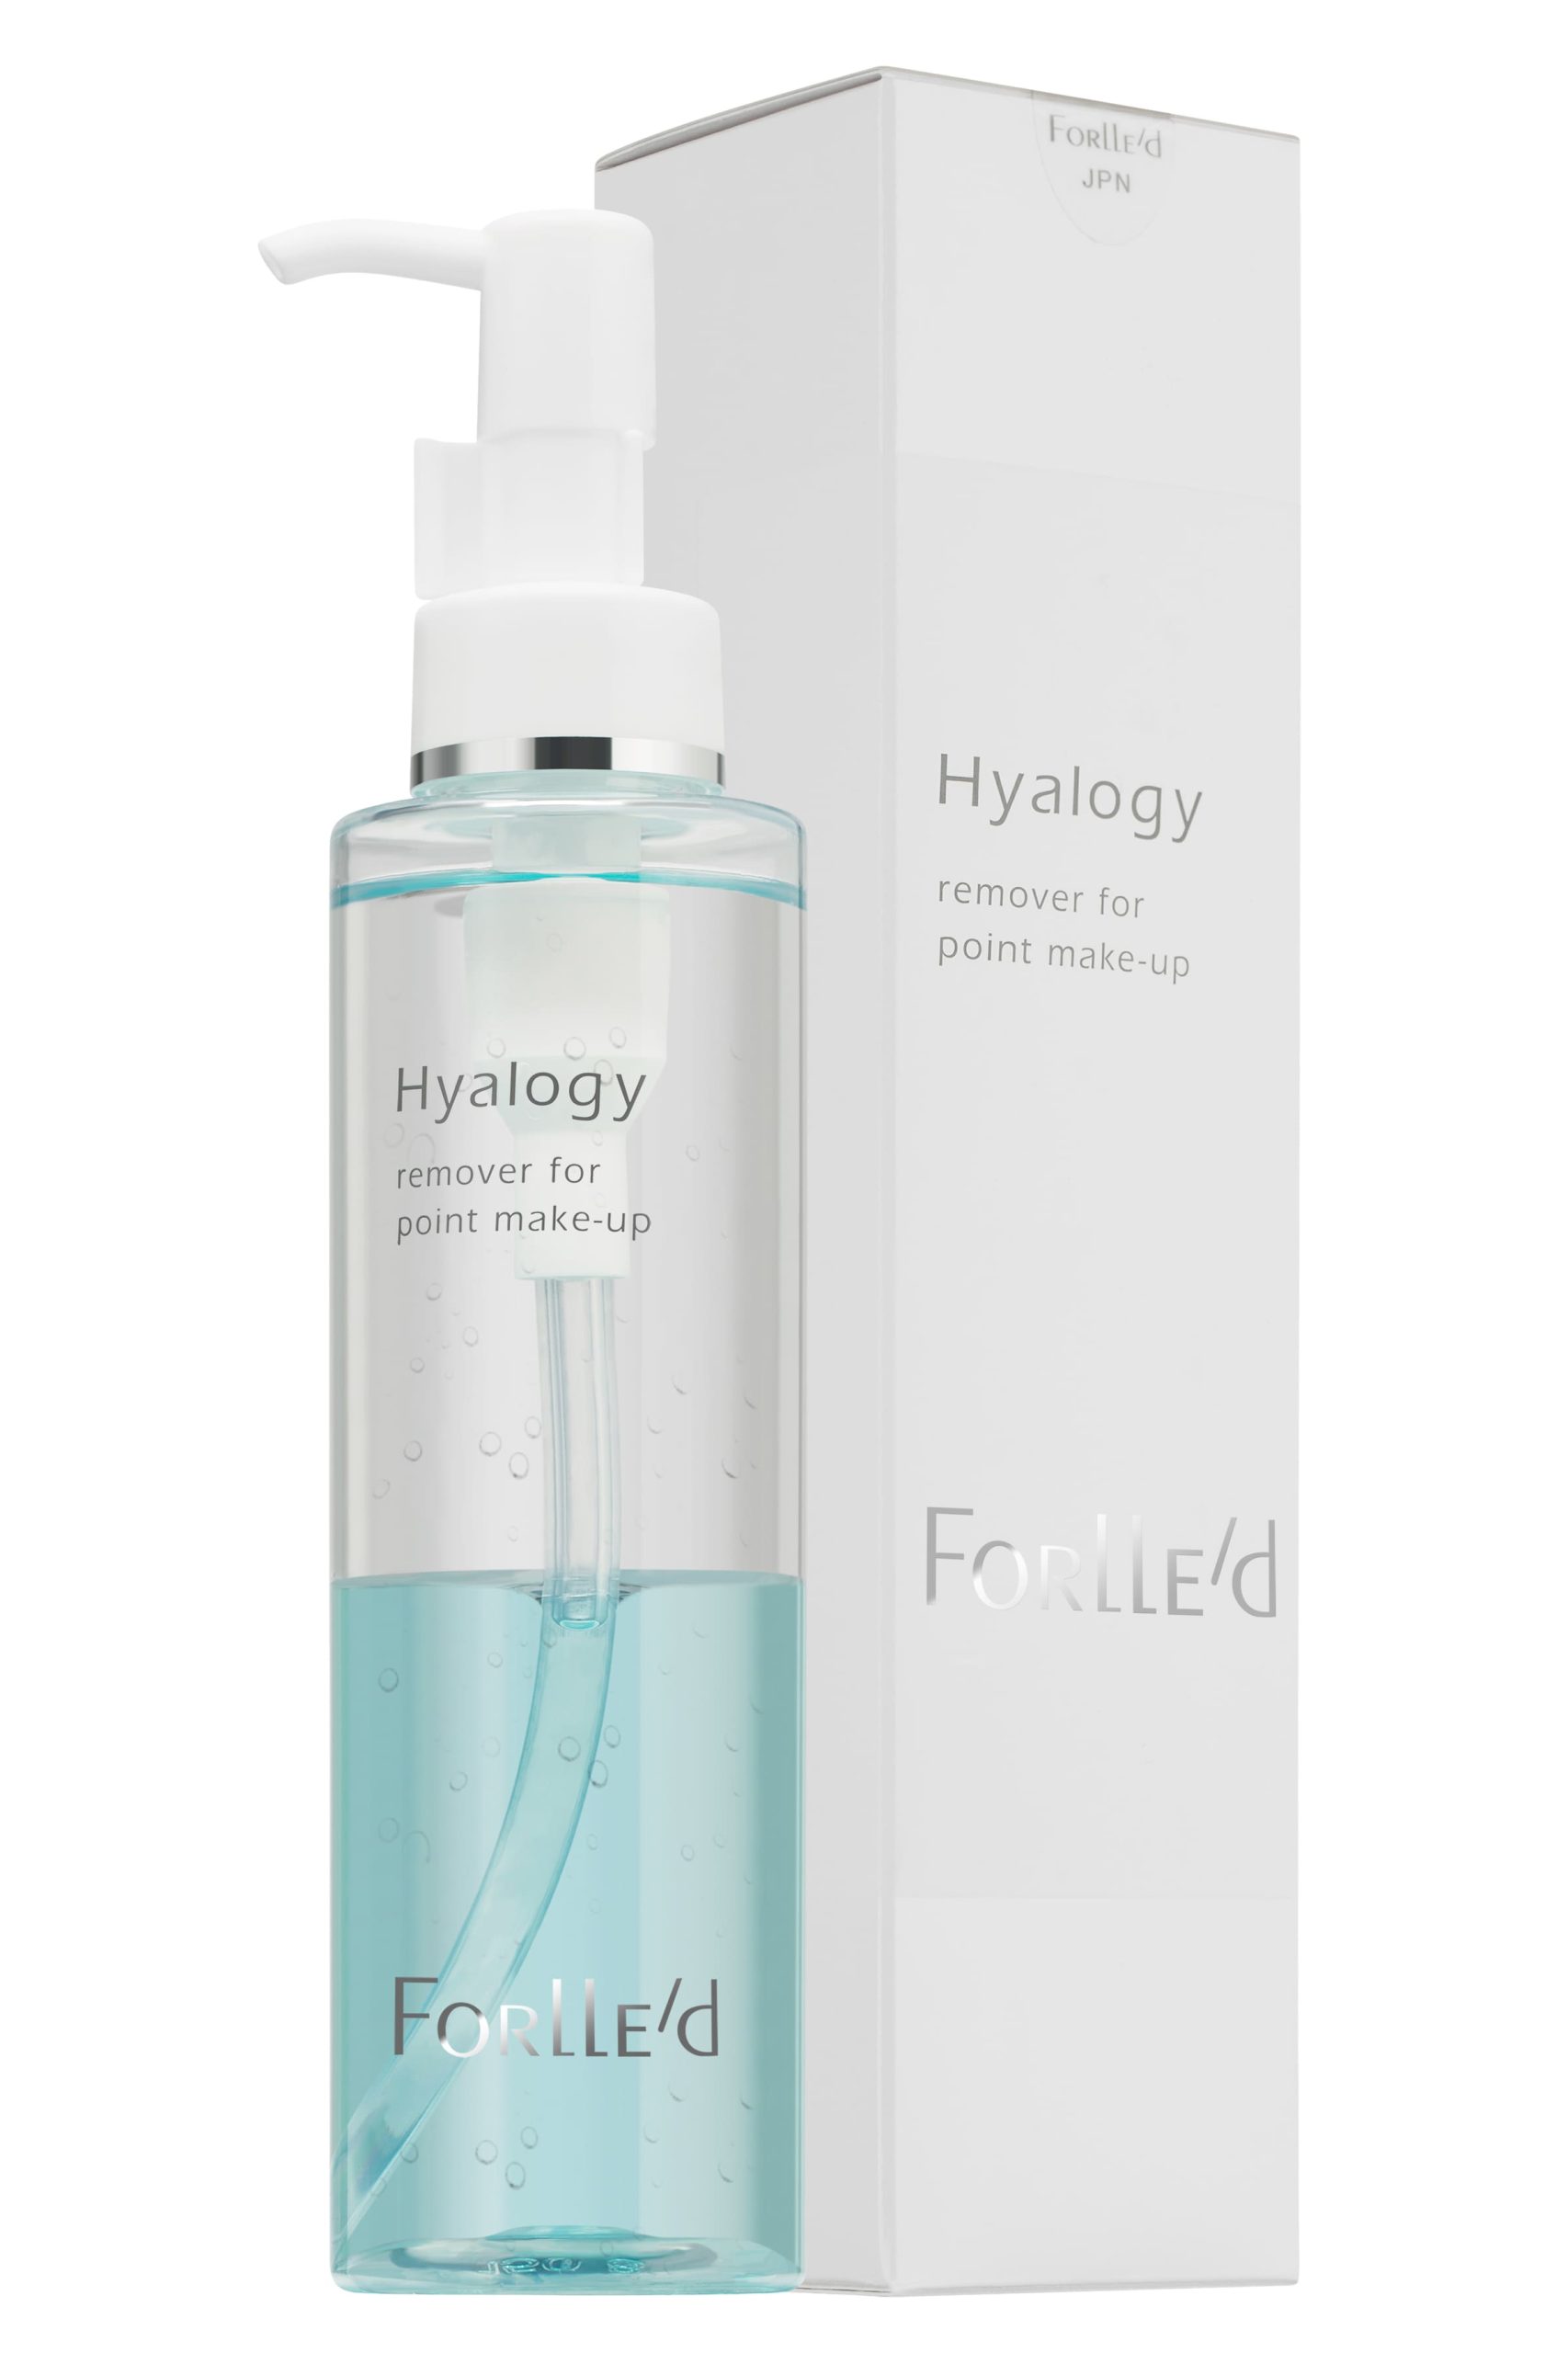 Hyalogy remover for point make-up DOM